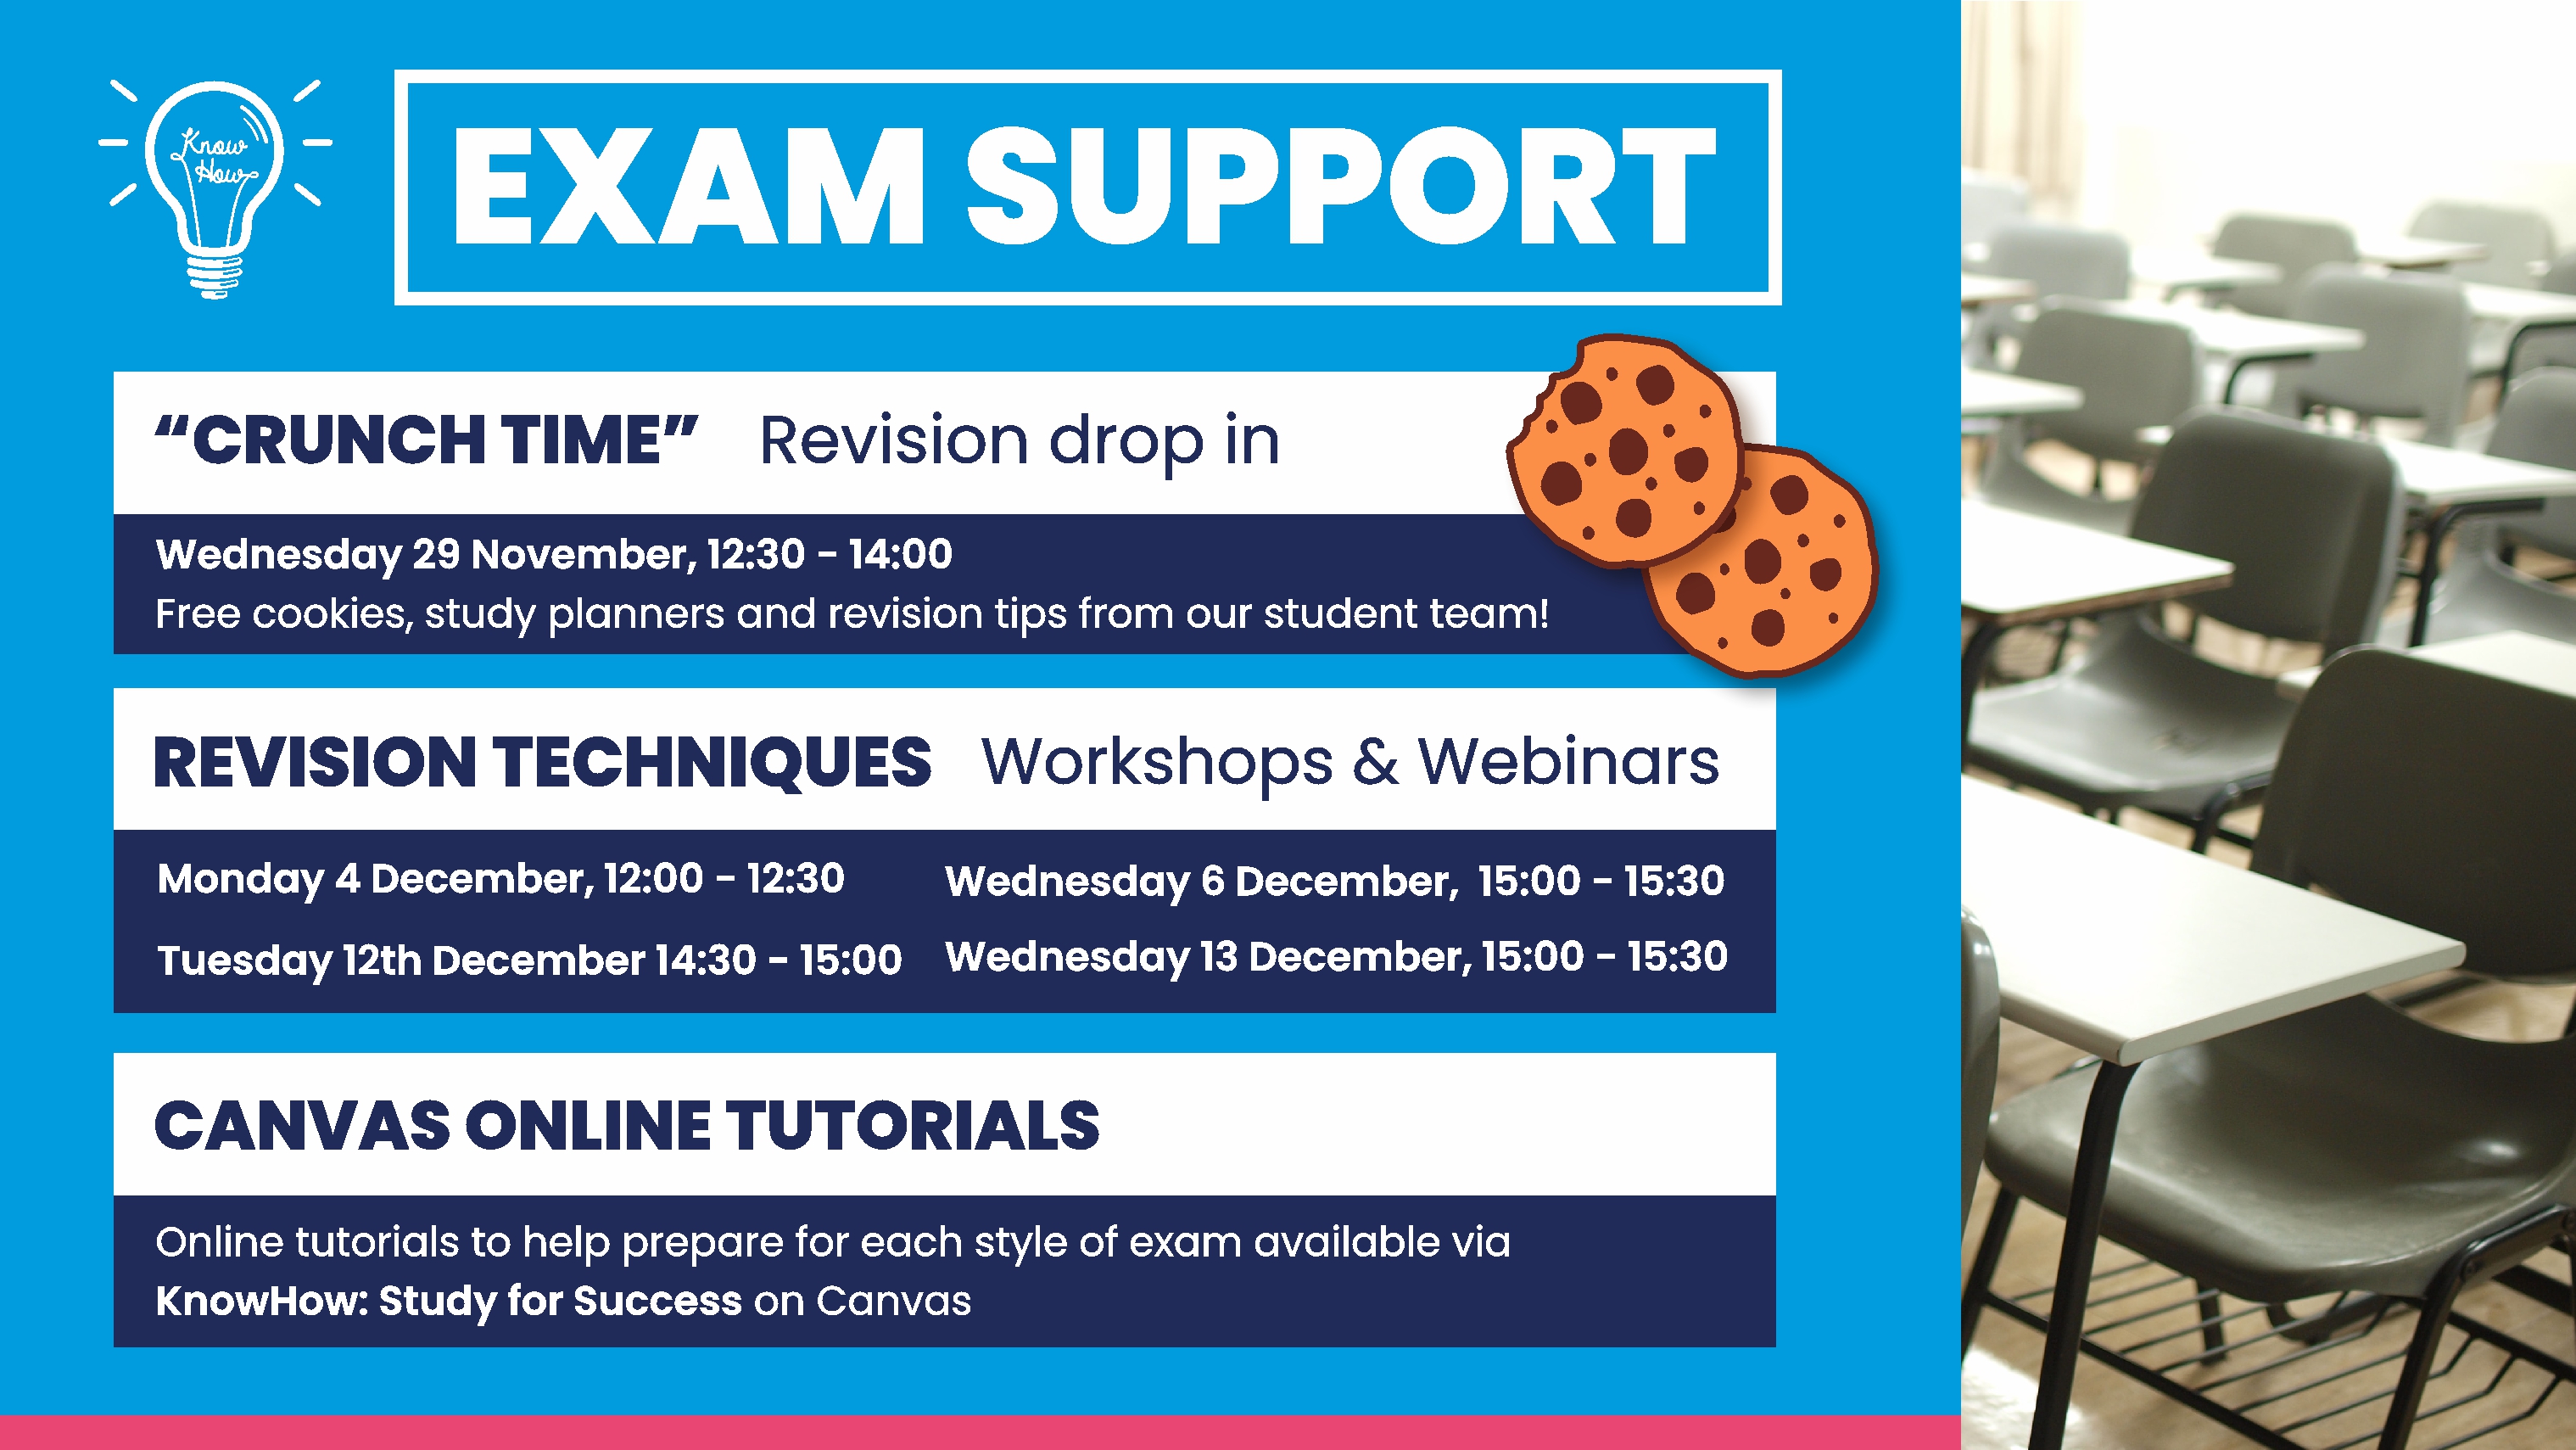 Exam Support from the KnowHow Team